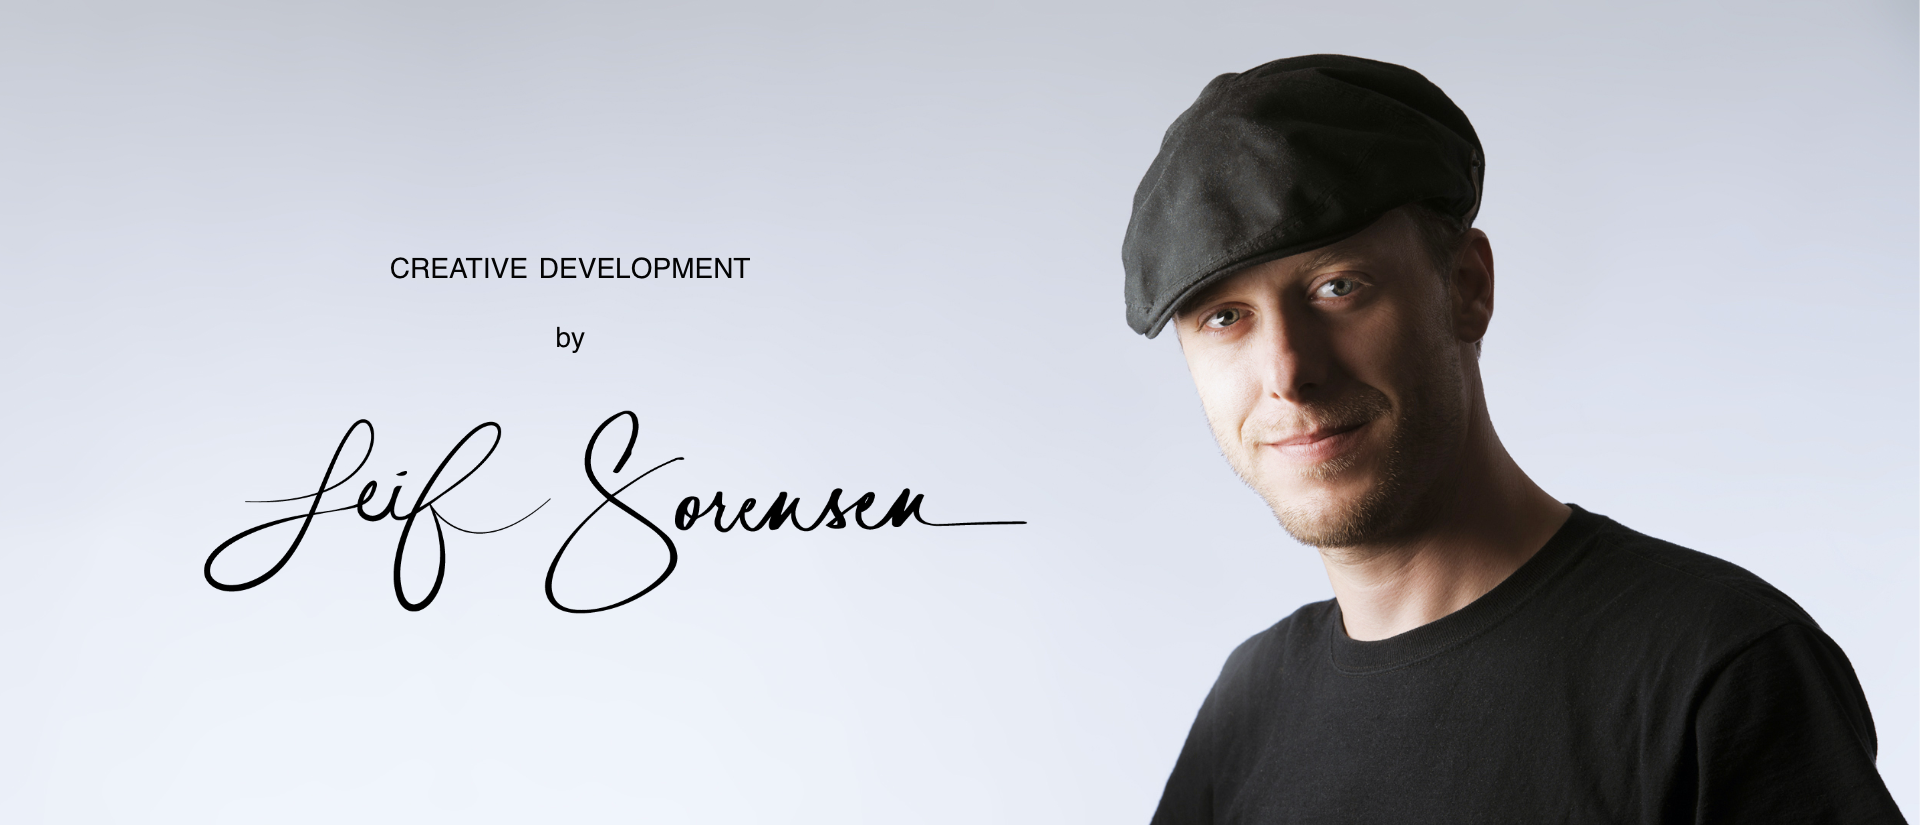 Portrait of Leif A. Sorensen with text creative development by and a signature logo of his name